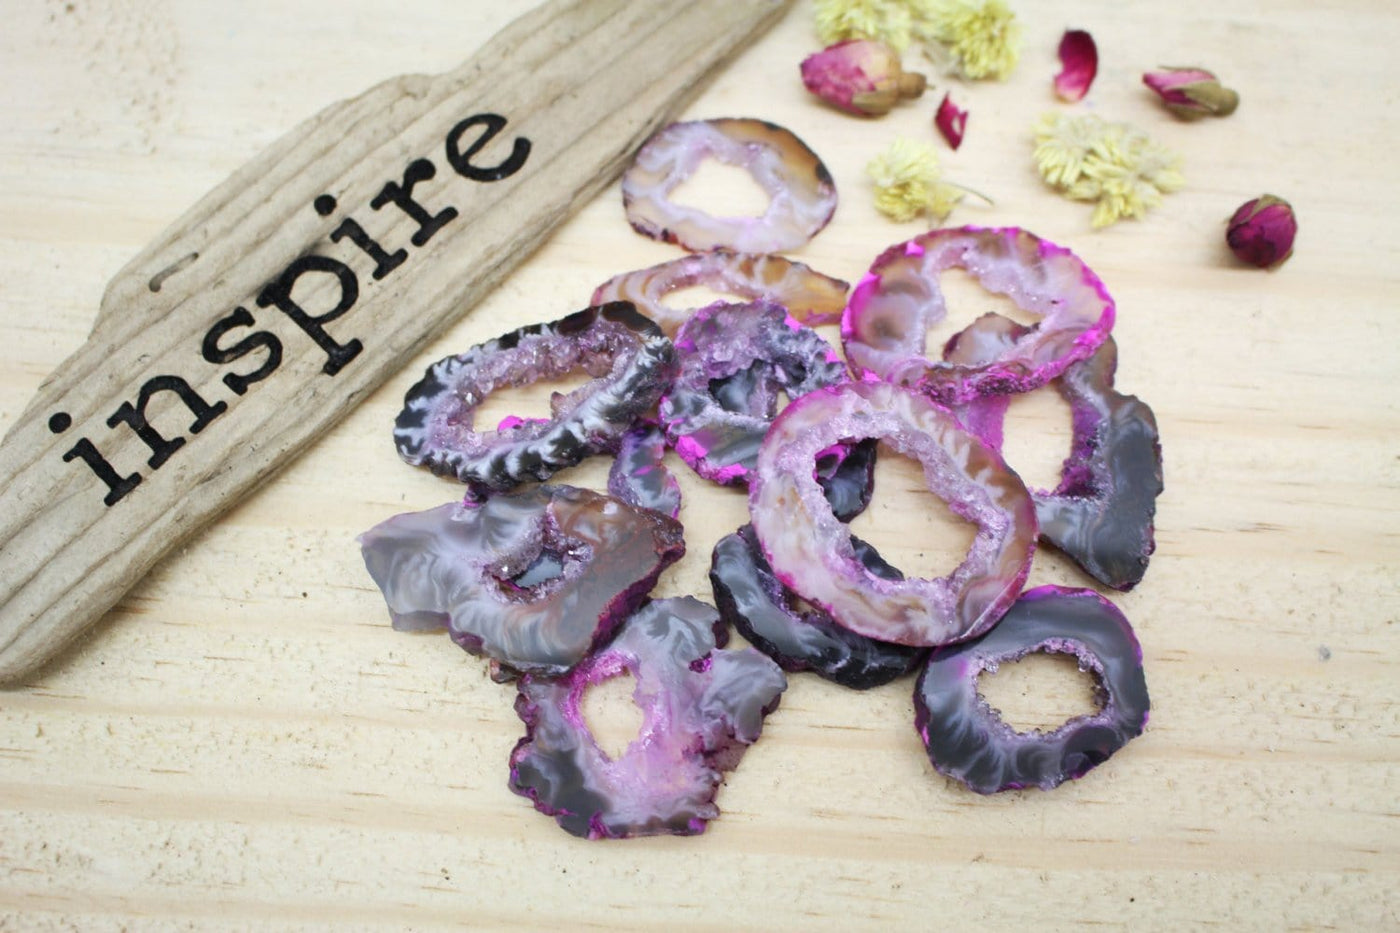 Multiple Dark Pink Geode Slice on Top Each other next to Inspire Wooden piece Sign and Flowers on the Side on Wood background.